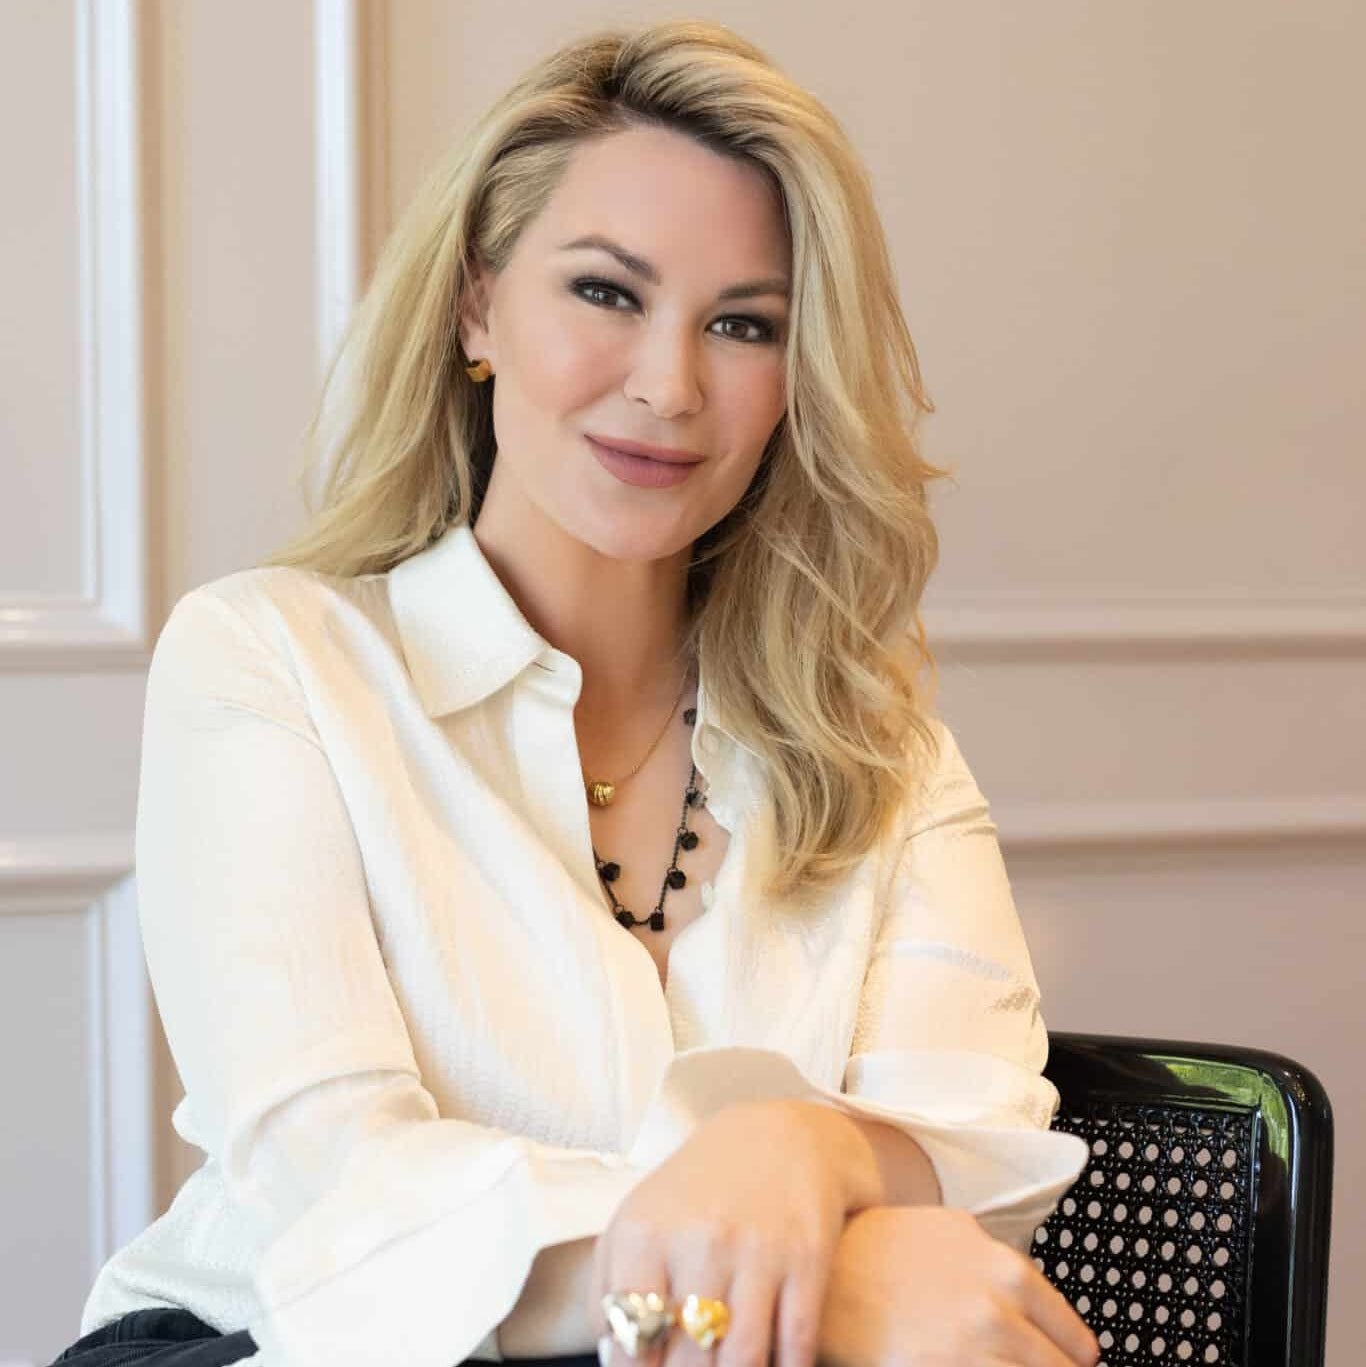 Fort Worth fashion entrepreneur Lauren Blake debuts a new jewelry line that blends high style and mixed metals with affordable luxe.